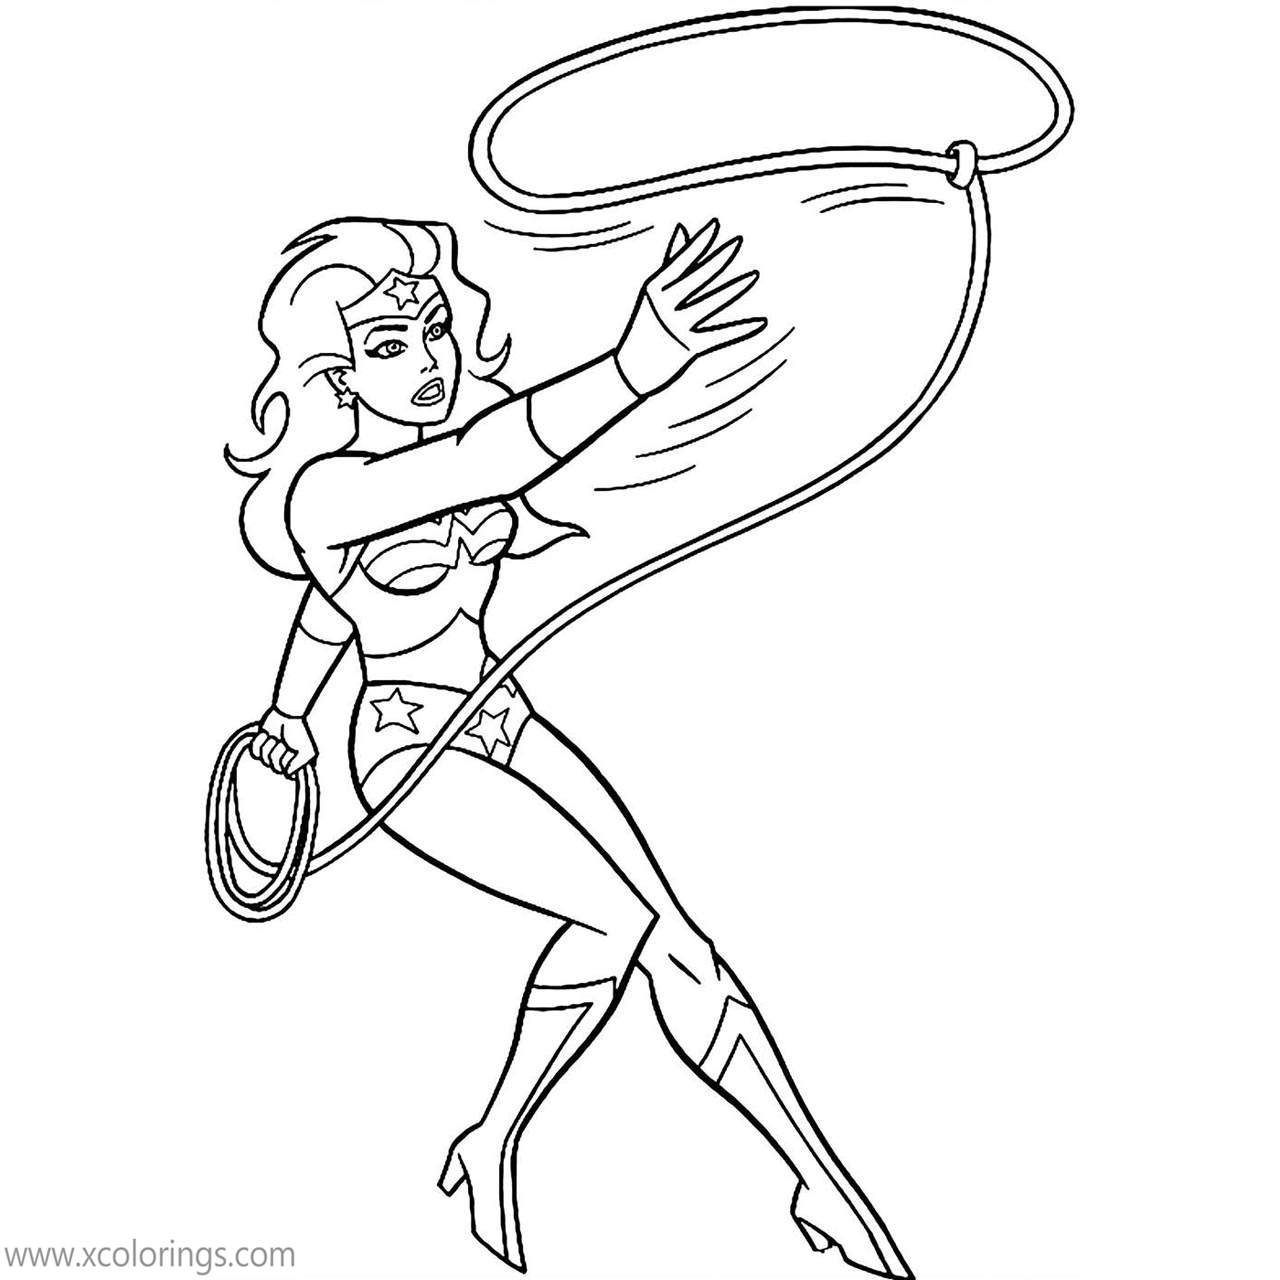 Free Animated Wonder Woman Throwing Out The Lasso Coloring Pages printable